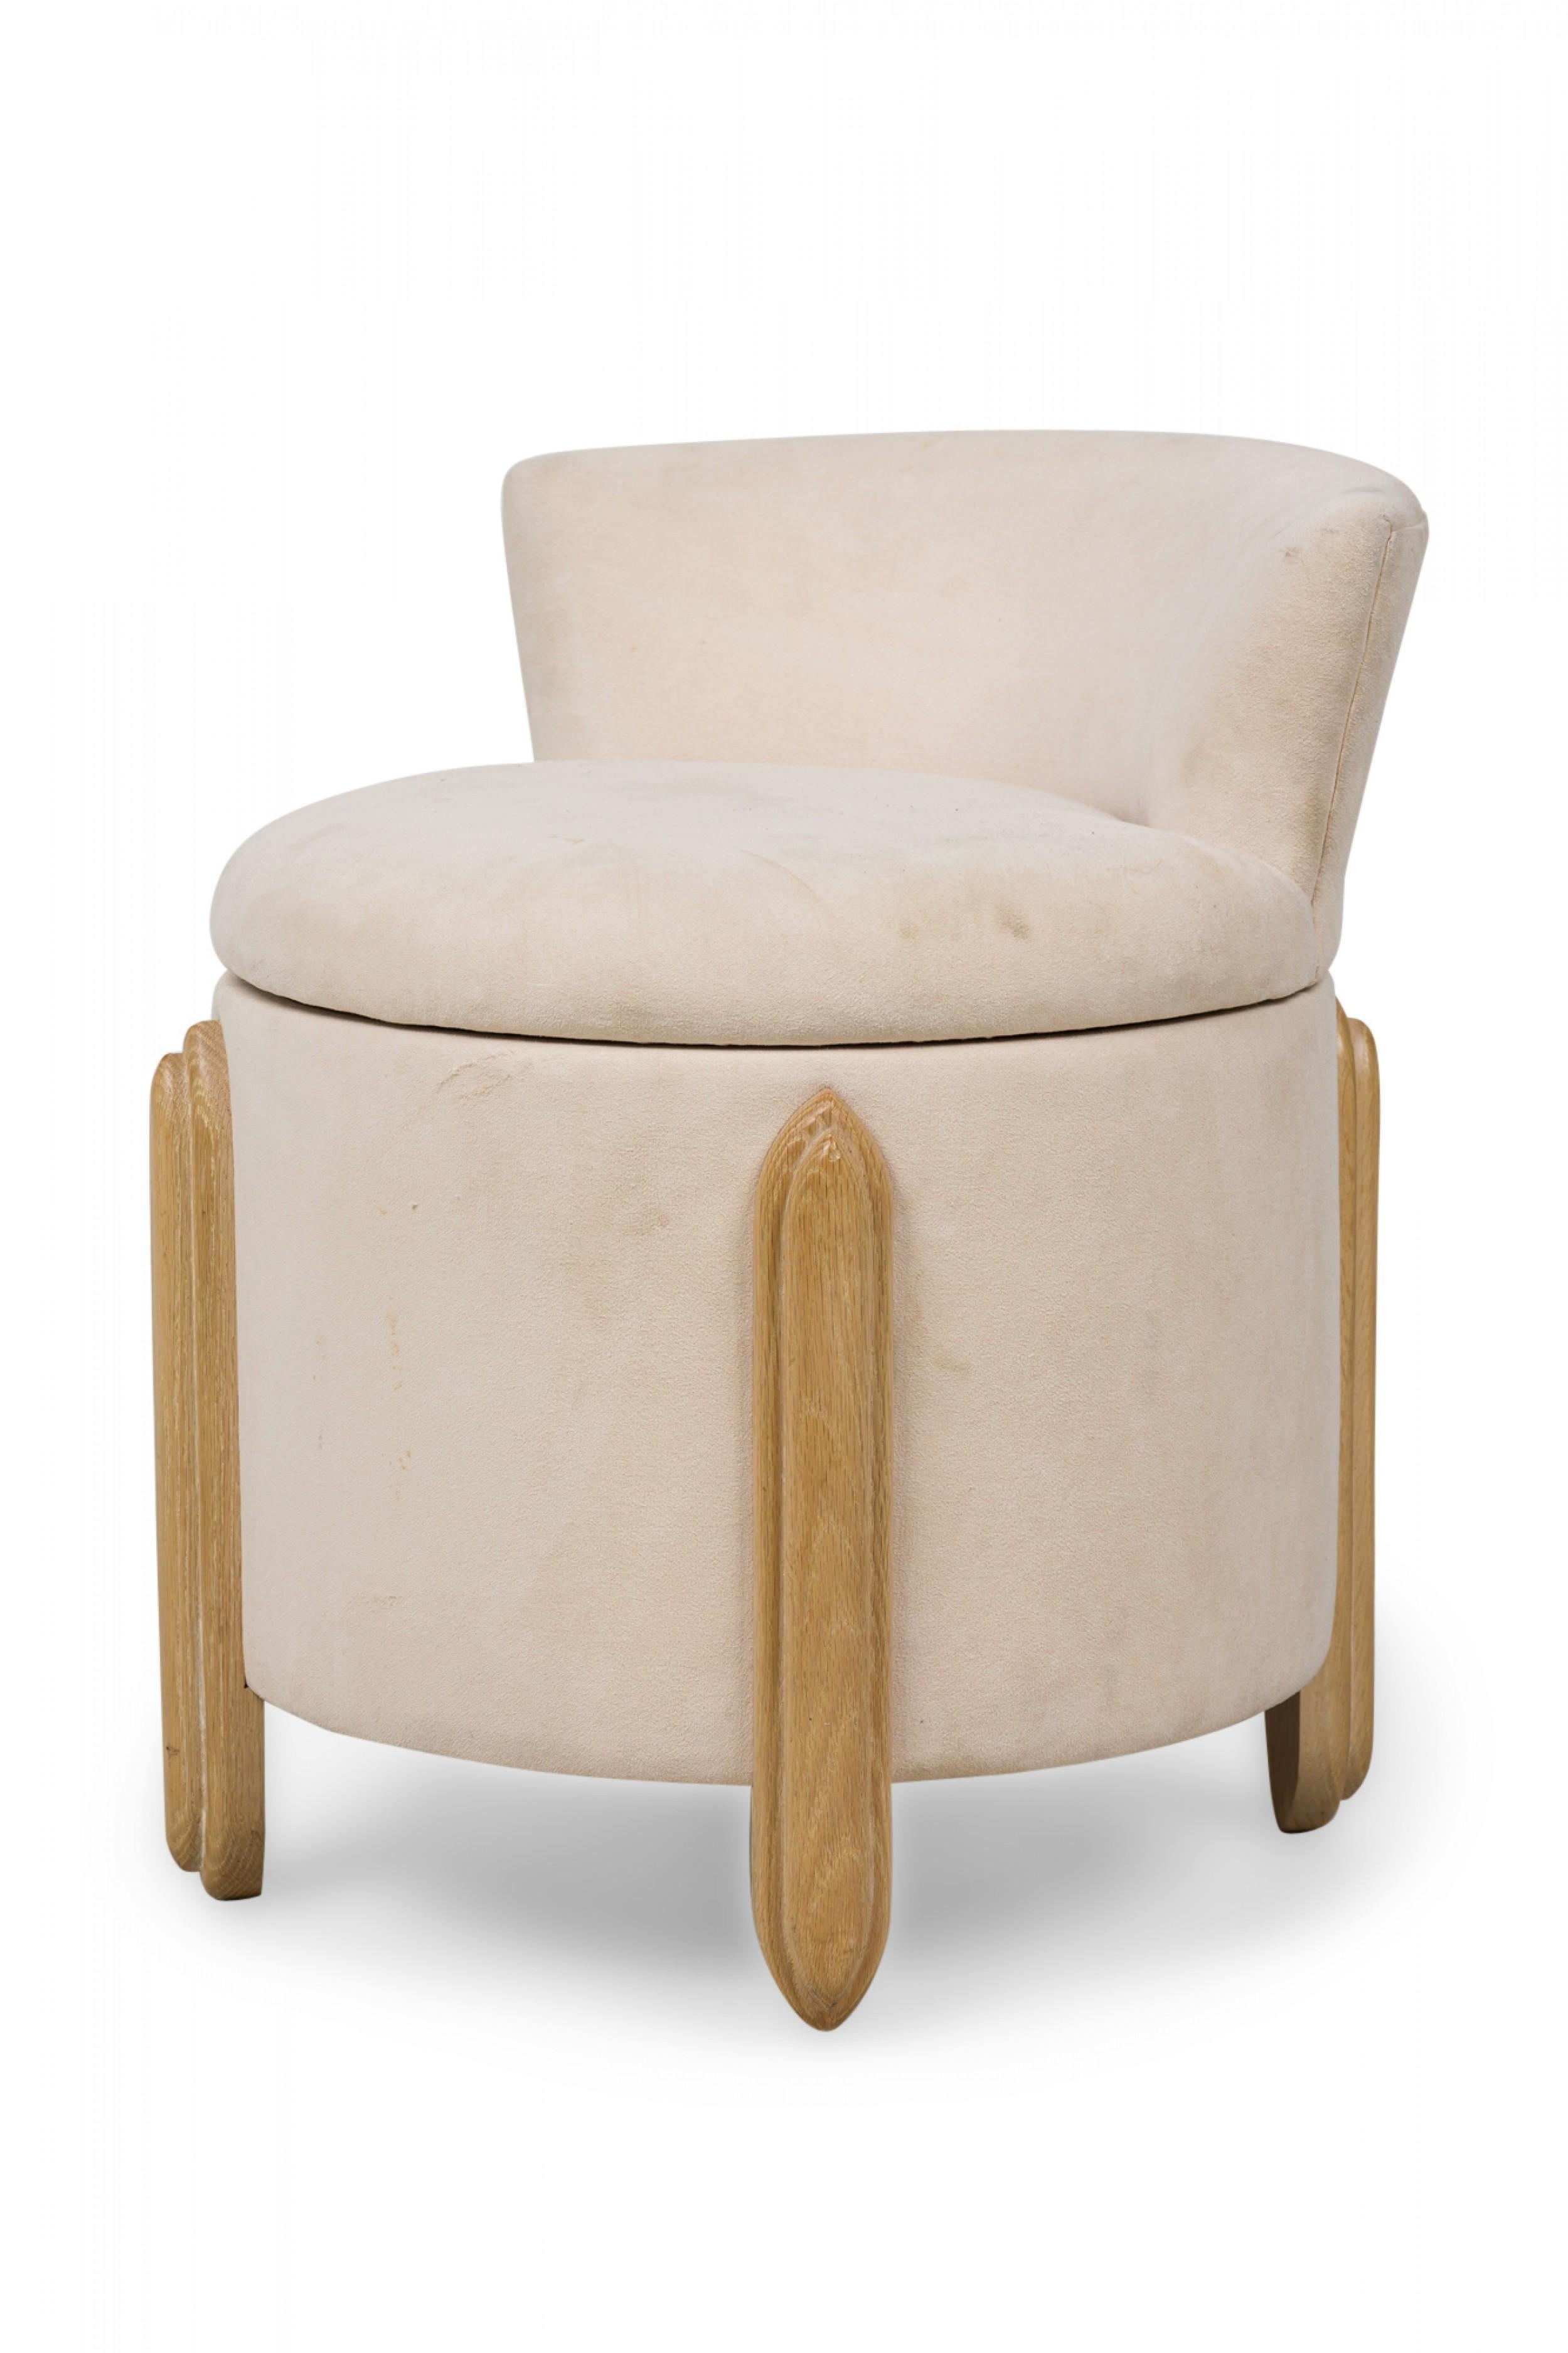 Midcentury American (1970s) barrel form ottoman with low backrest, upholstered in beige suede, featuring oval shaped, beveled legs extending up the sides. (Jay Spectre).